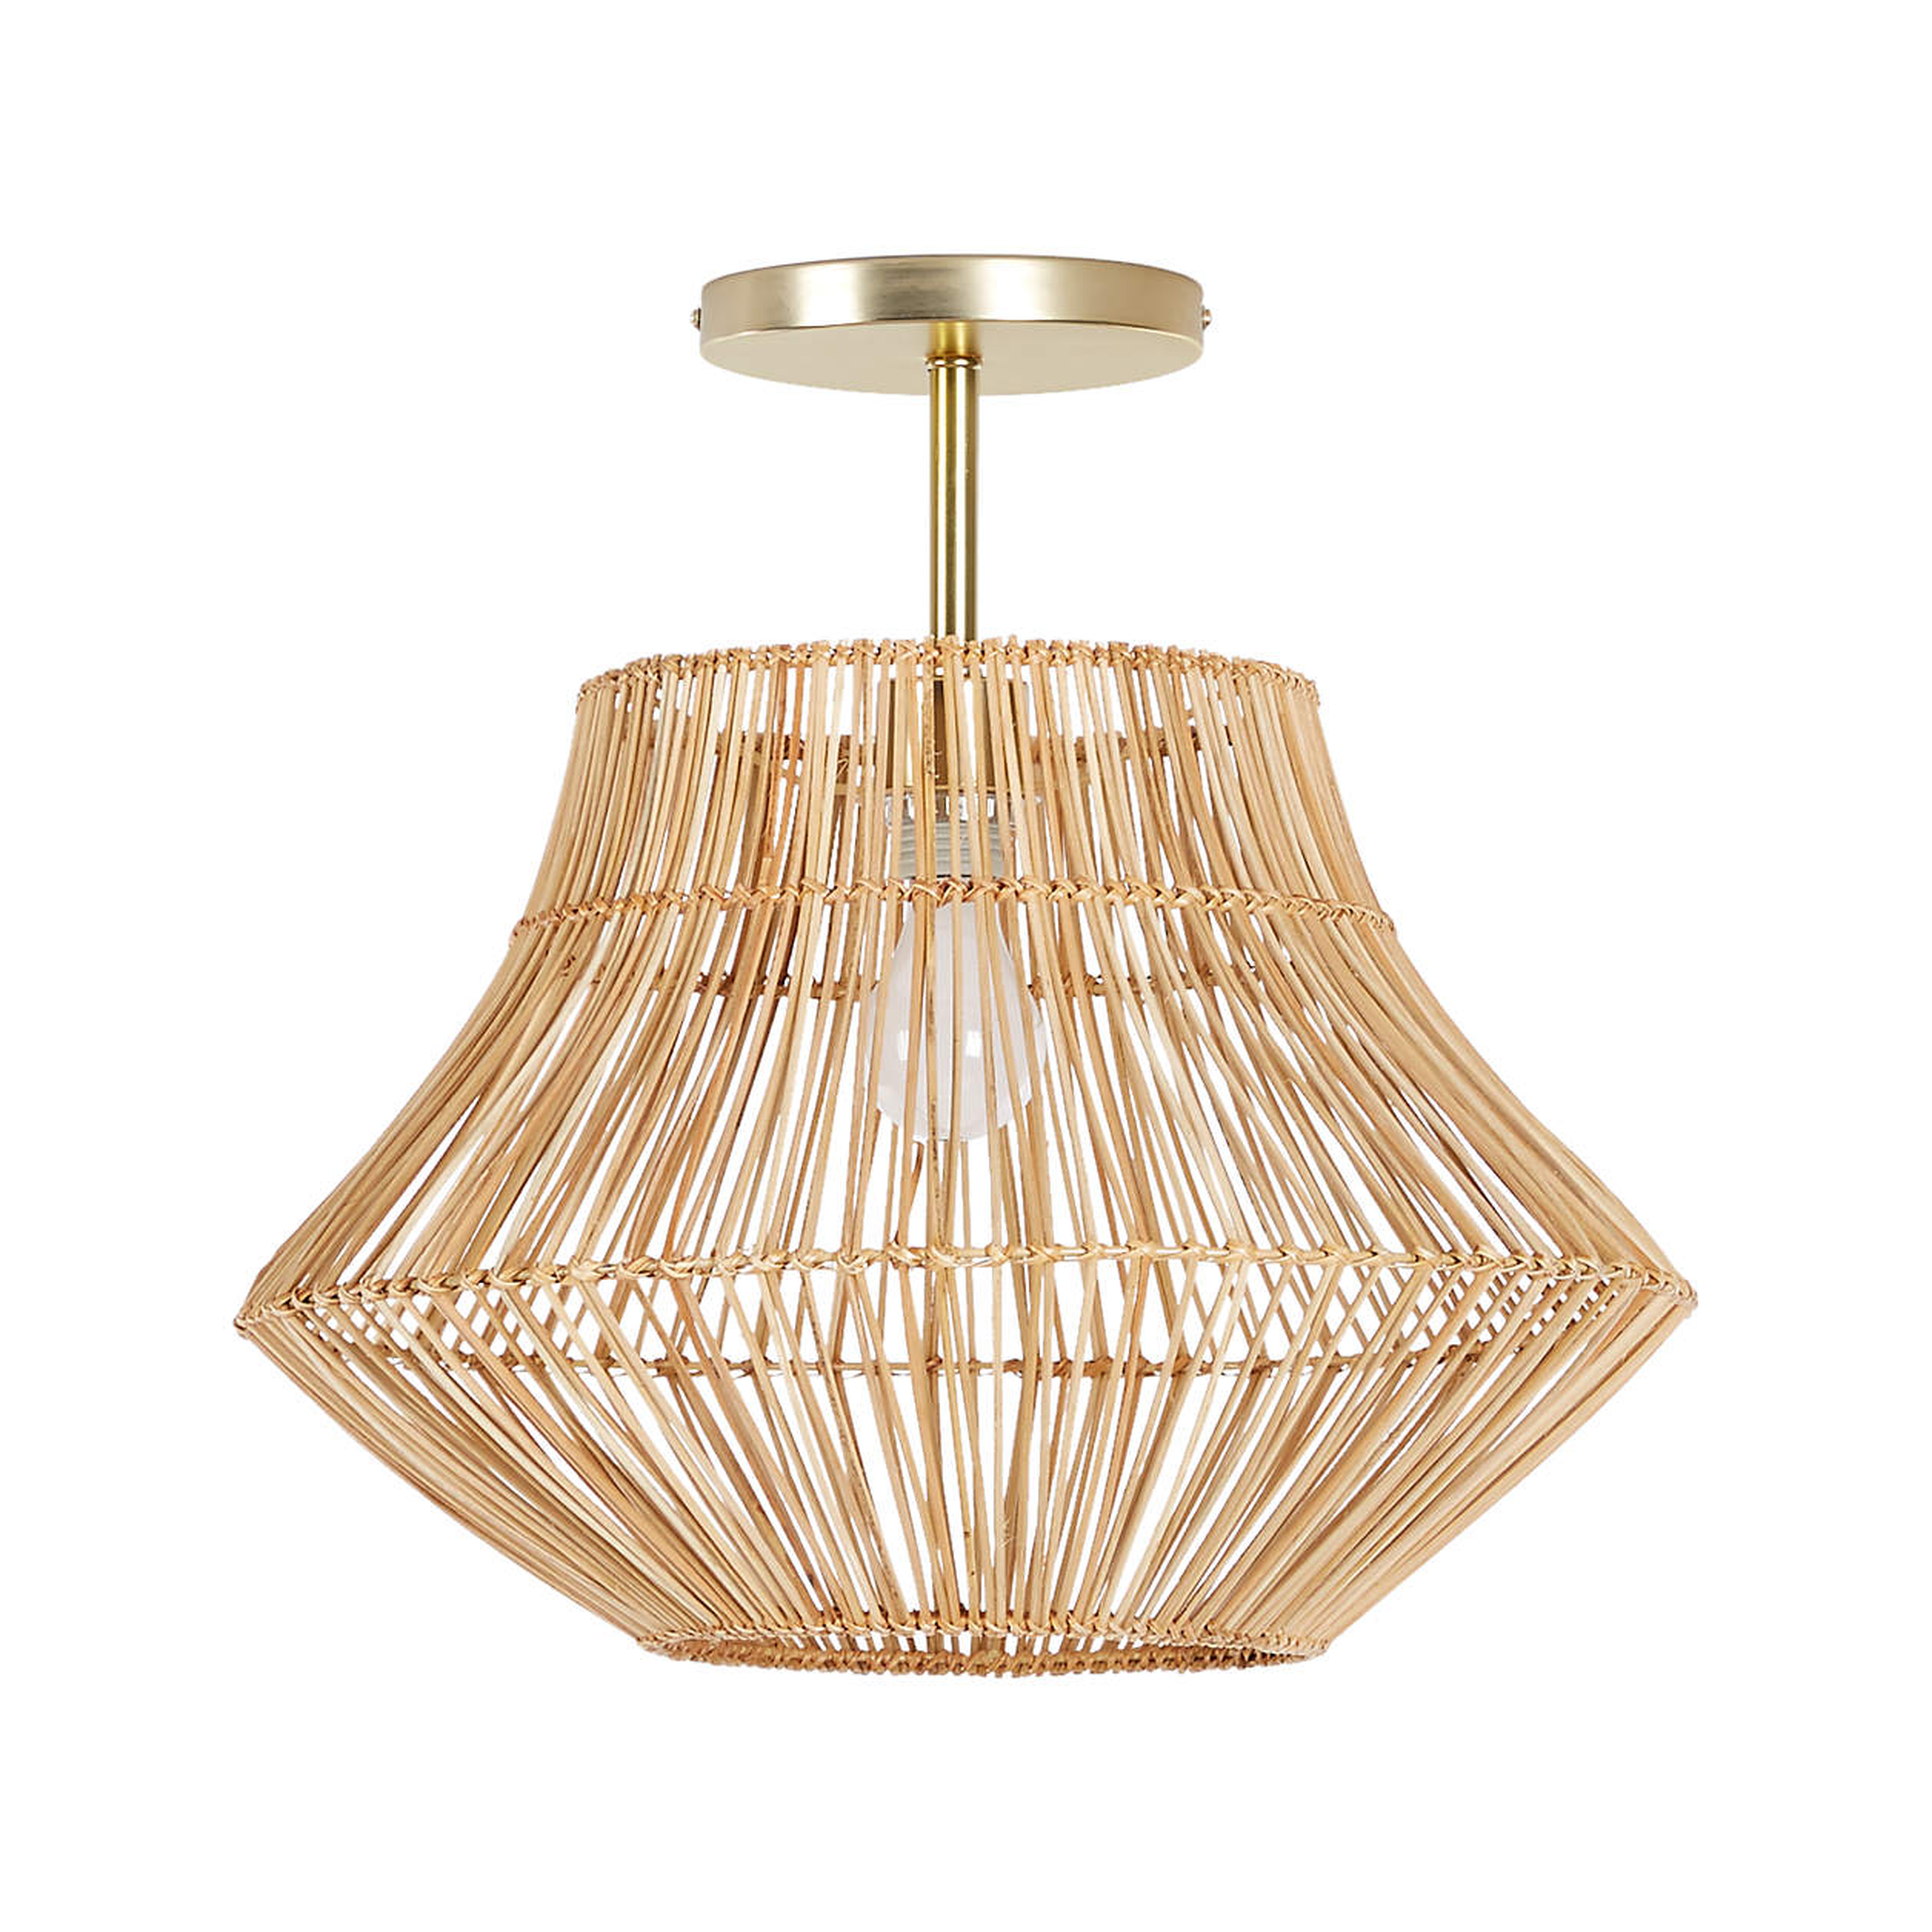 Basket-Style Woven Rattan 19" Kids Flush Mount Ceiling Light - Crate and Barrel